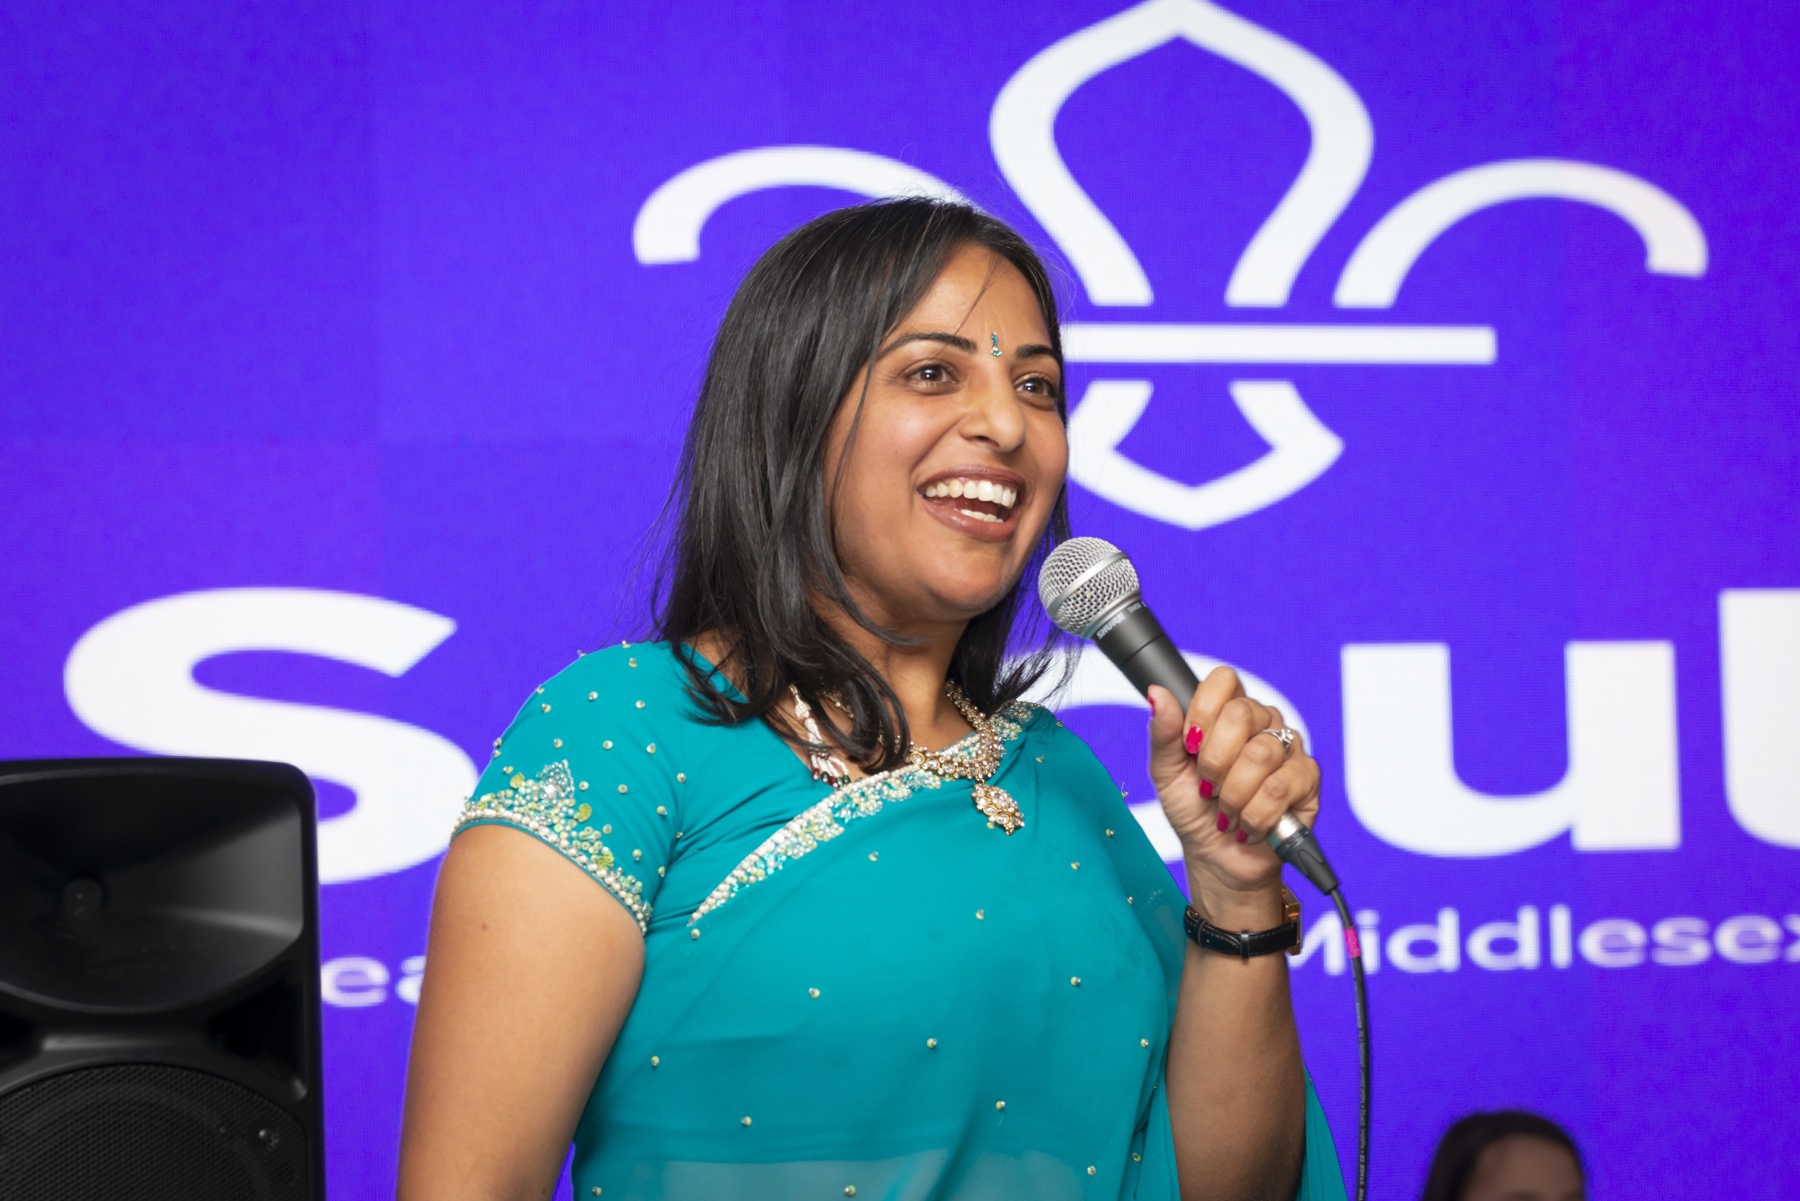 UK Commissioner for Perception, Nisha Patel, smiles while holding a microphone and wearing traditional Diwali clothing